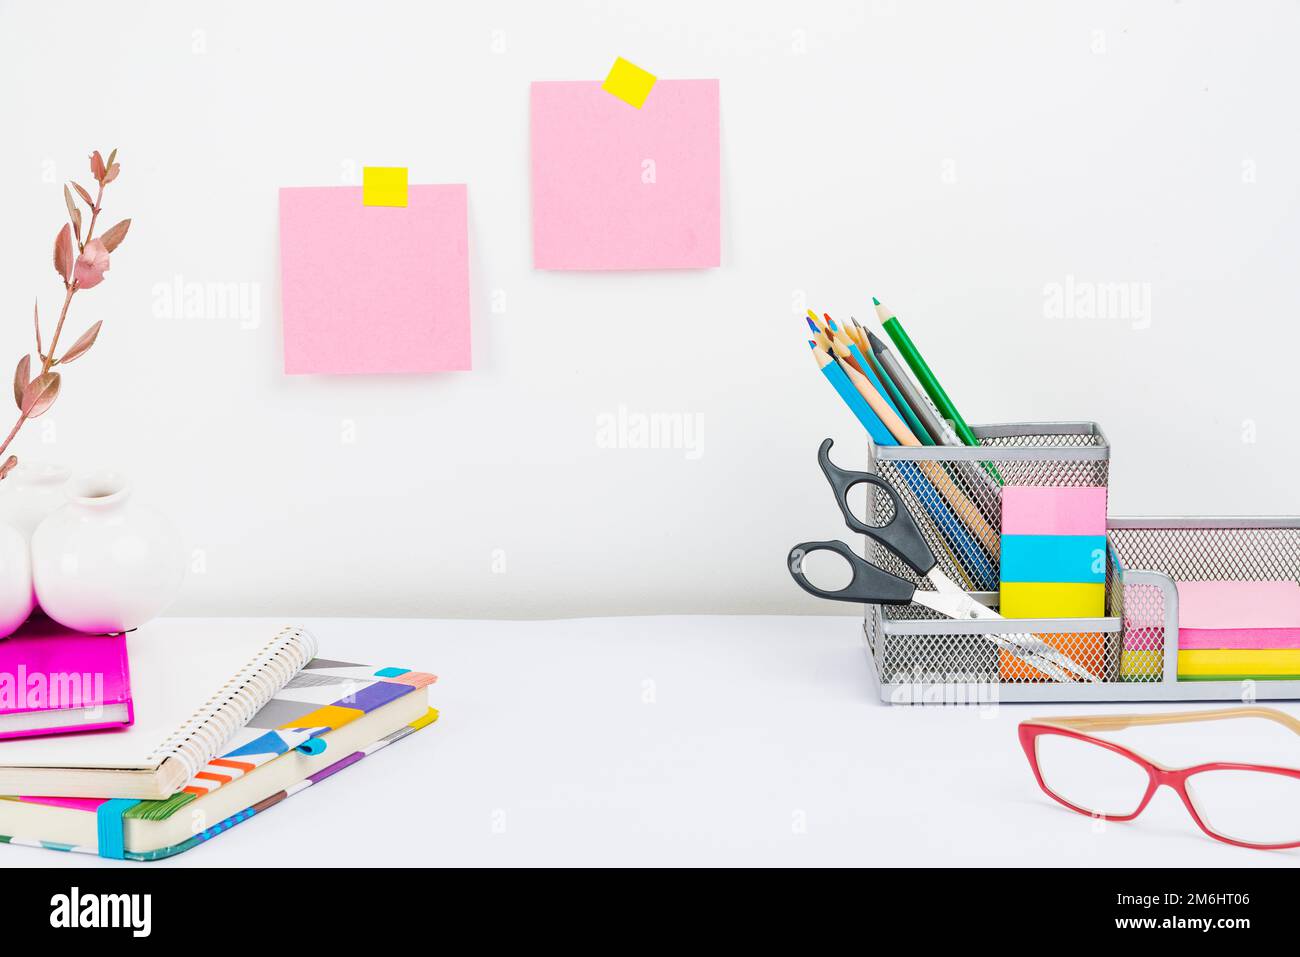 Tidy Workspace Setup, Writing Desk Tools Equipment, Smart Office Arrangement, Study Table, Taking Notes, Fresh Room Designs, Org Stock Photo